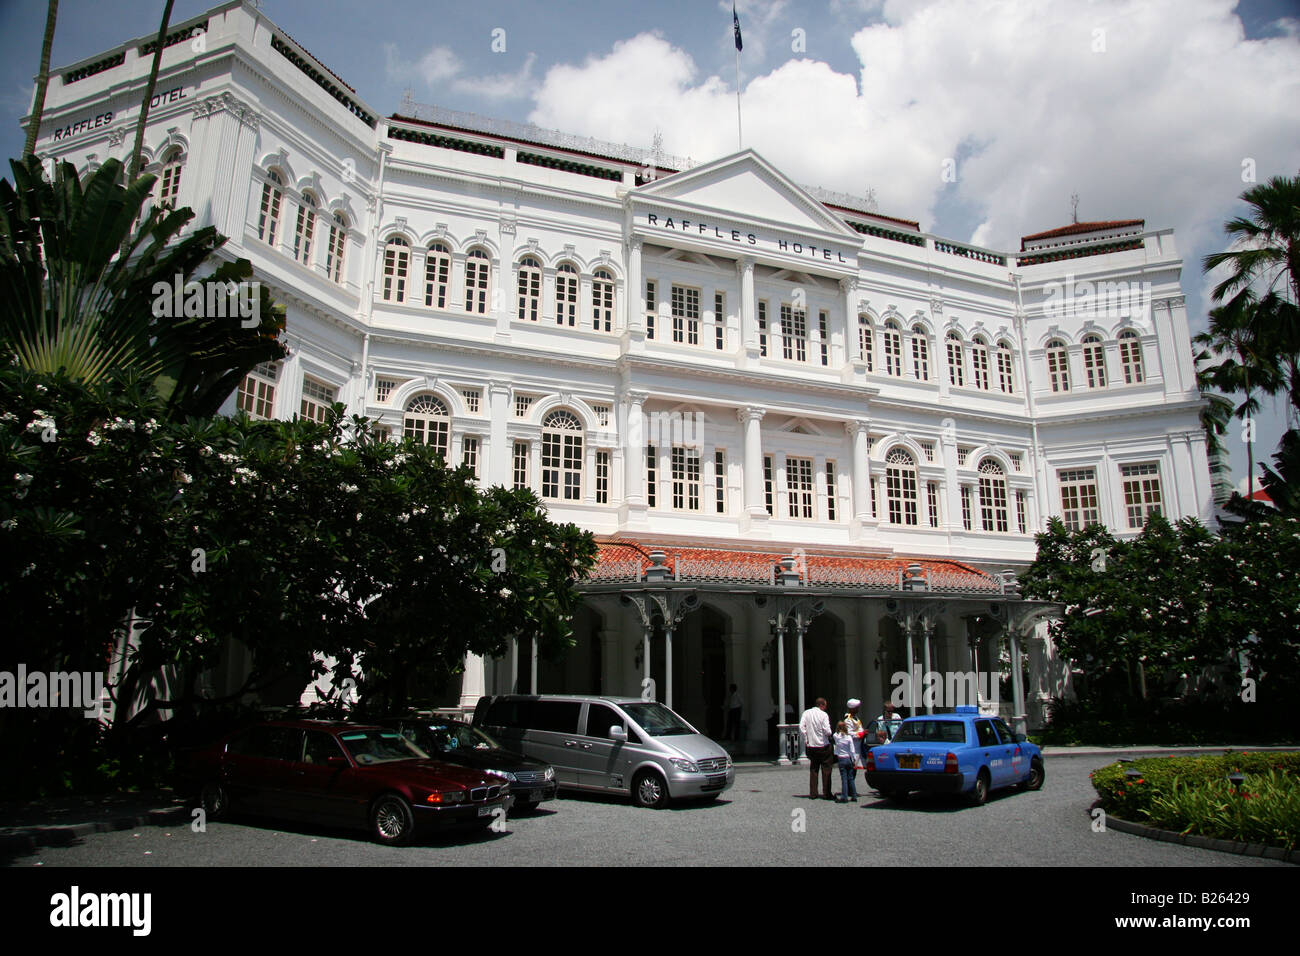 The facade of Raffles Hotel in Singapore. The hotel is the watchword for luxury and service on the island. Stock Photo